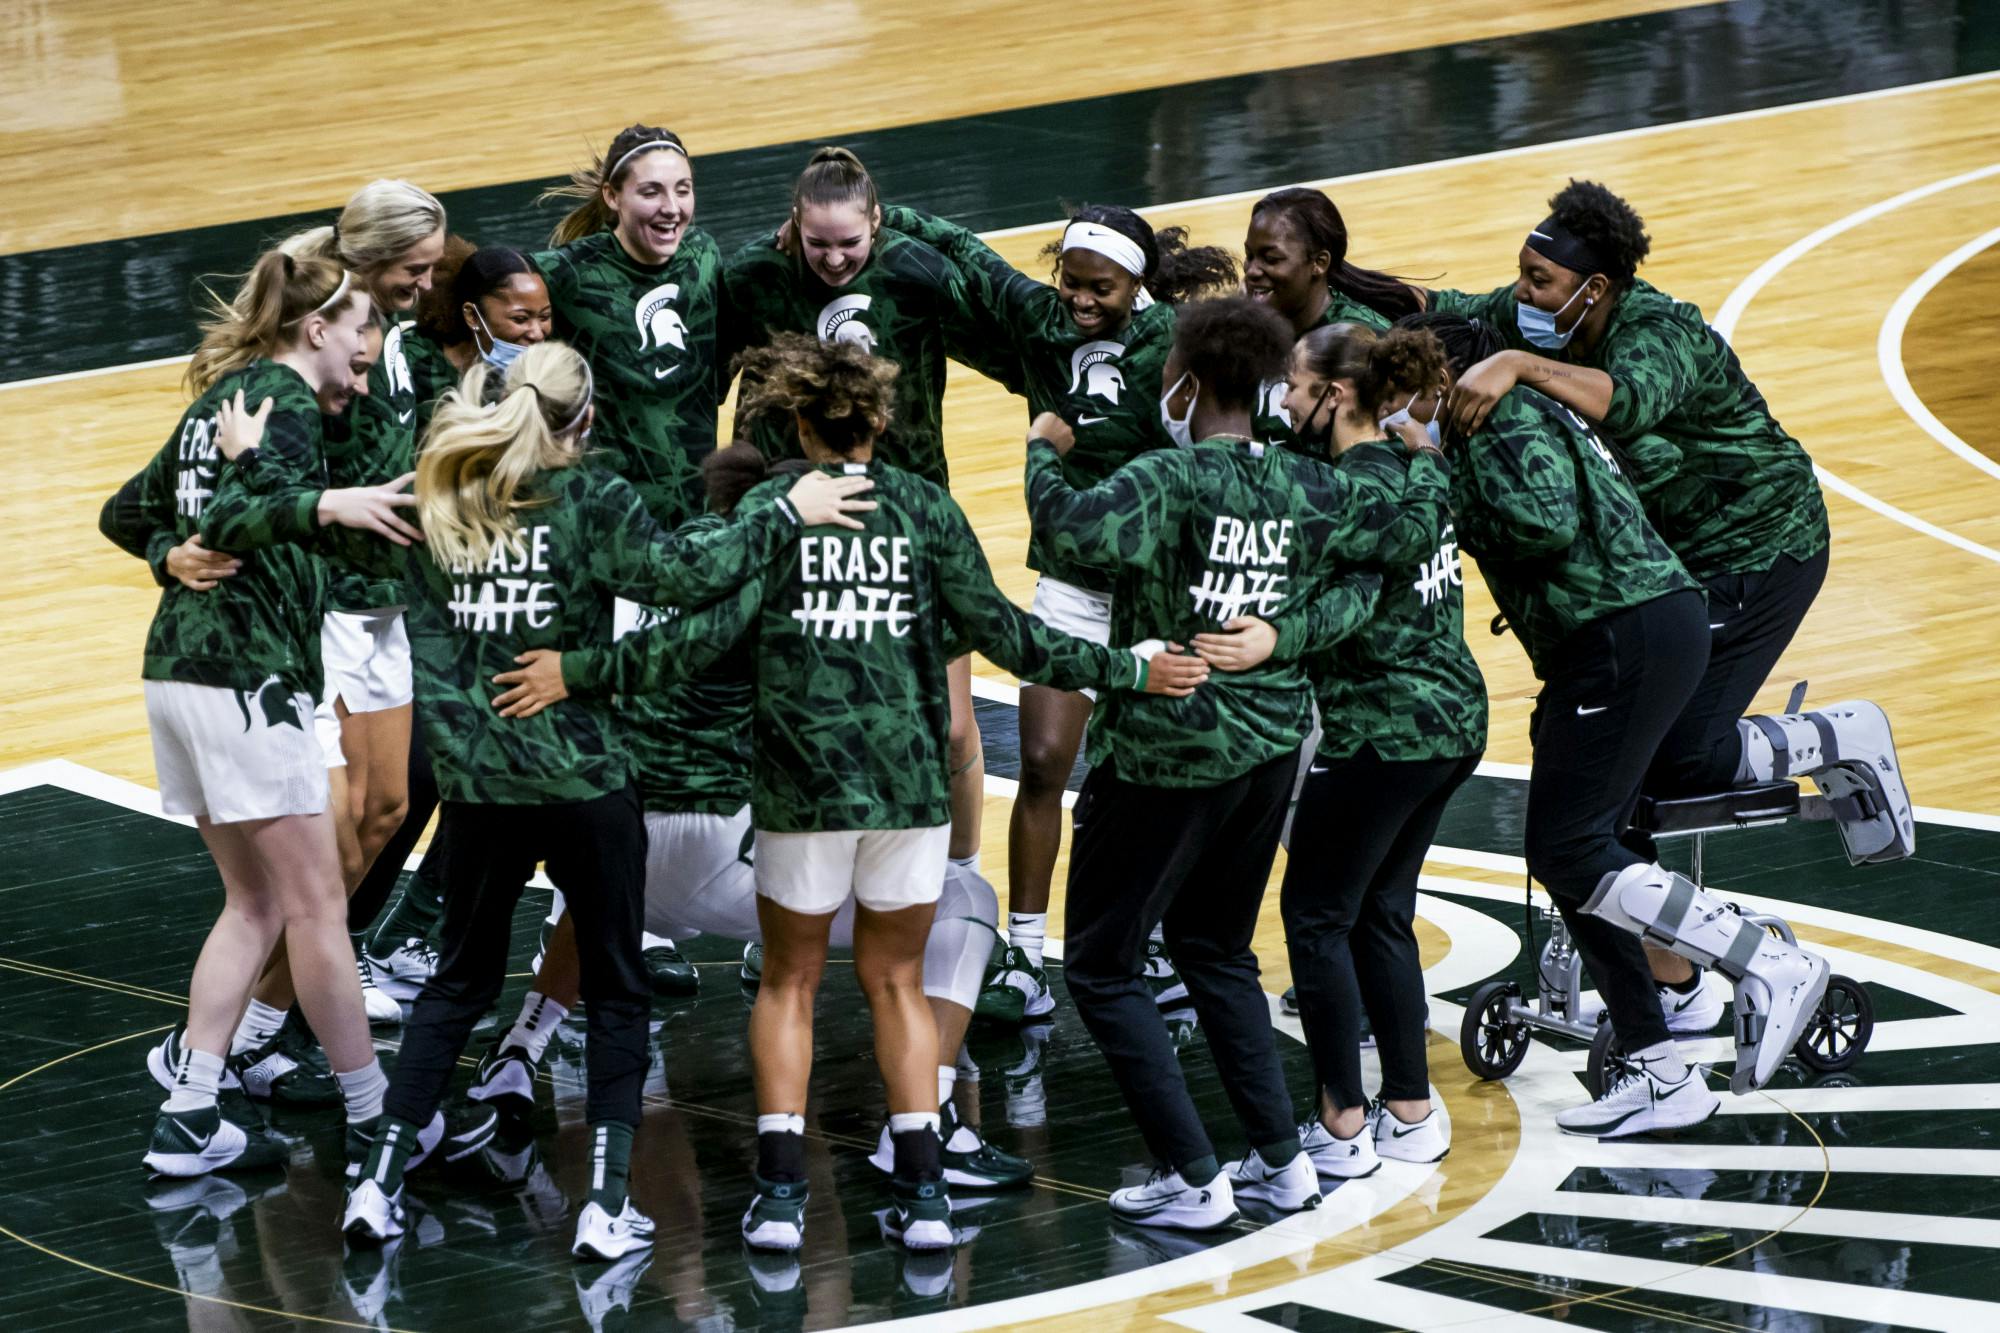 <p>The Michigan State University women&#x27;s basketball team huddles together before their first game against St. Francis PA on Nov. 27, 2020.</p>